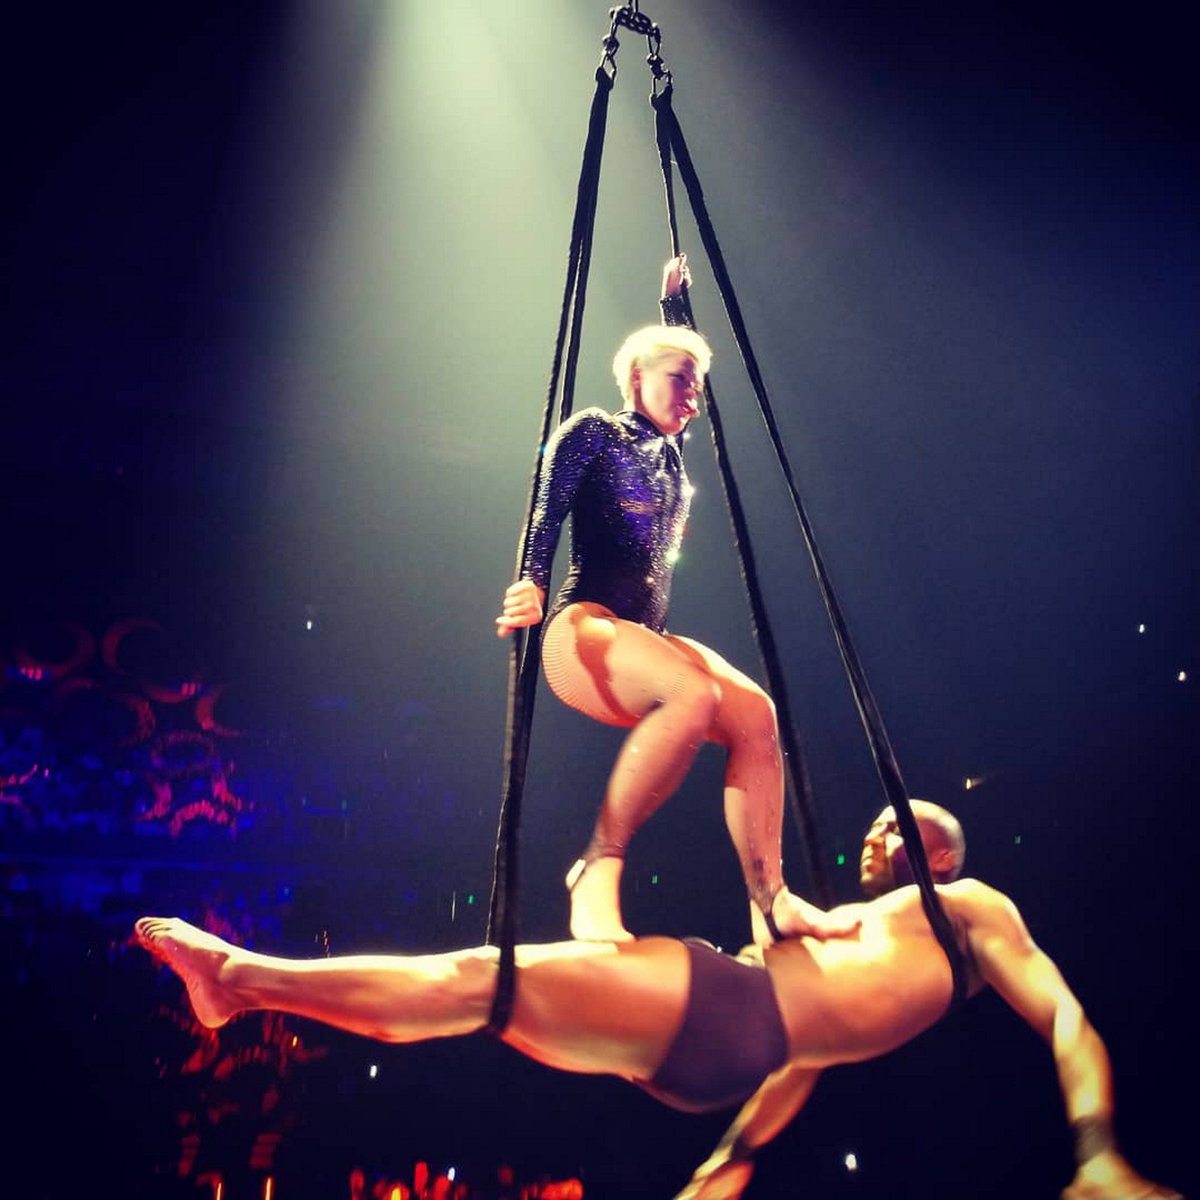 Also, it becomes the 10th highest-grossing tour in history, being P!nk the first woman to join the list since Madonna.